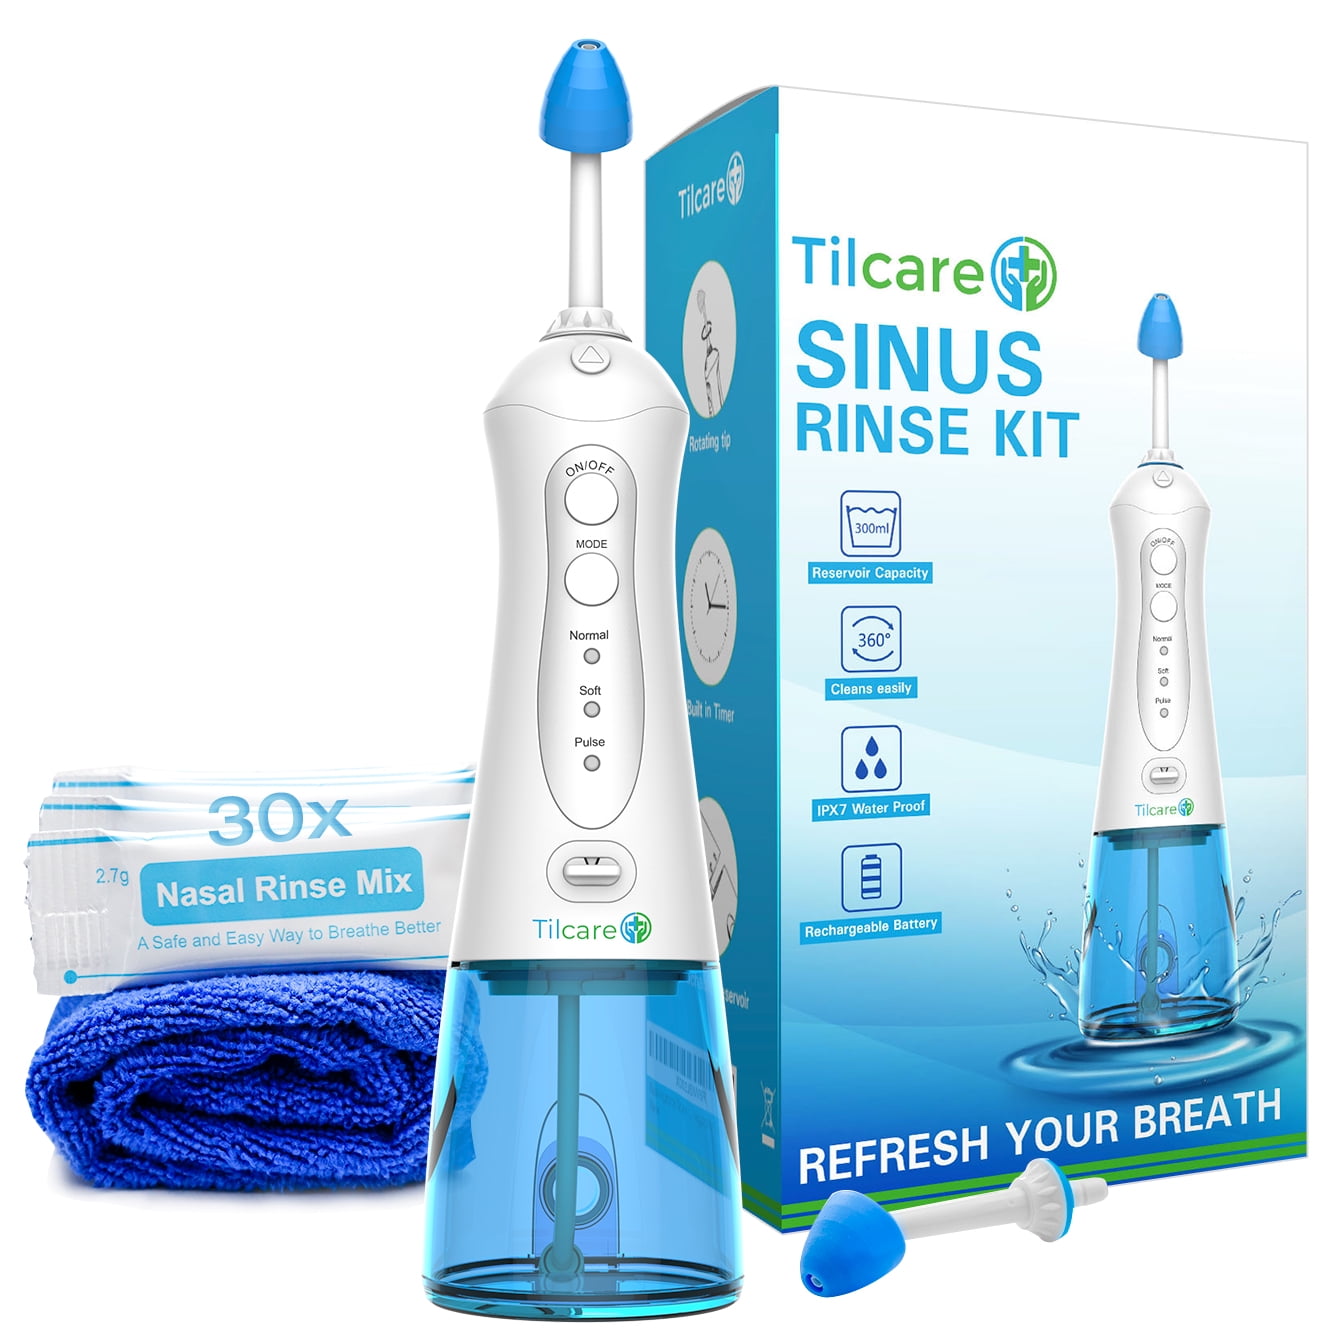 SinuFlux Nasal Irrigation System, Pulsating Nasal Rinse Machine for Sinus &  Allergy Relief Electric Neti Pot with Customizable Nasal Cleaner Kit -  Yahoo Shopping